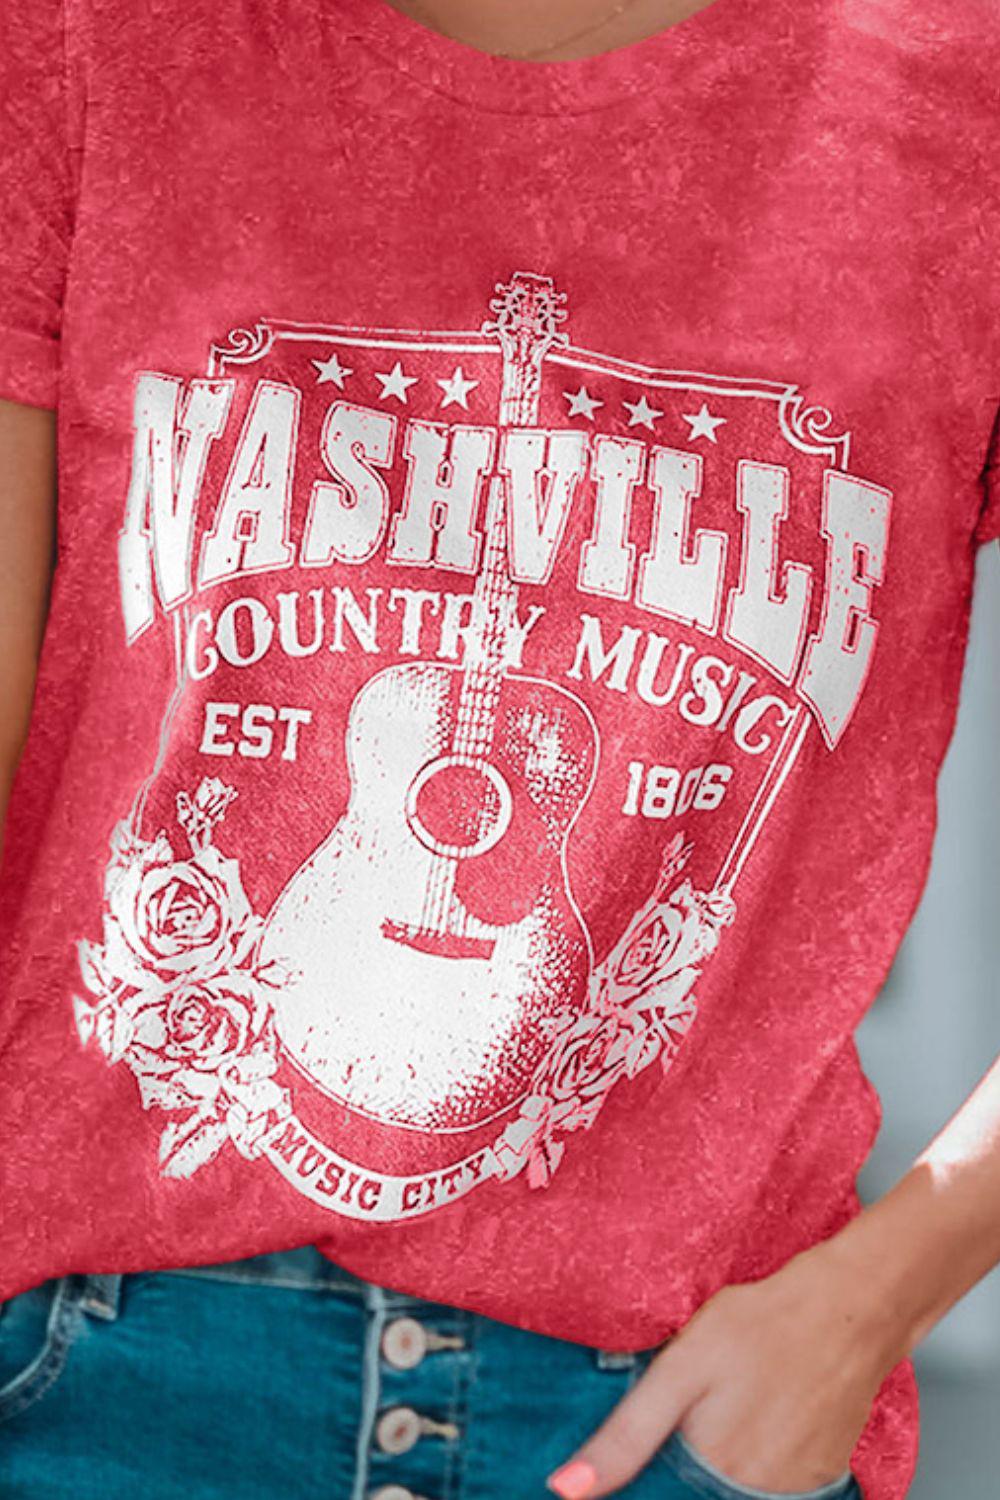 NASHVILLE COUNTRY MUSIC Graphic Round Neck Tee Shirt BLUE ZONE PLANET